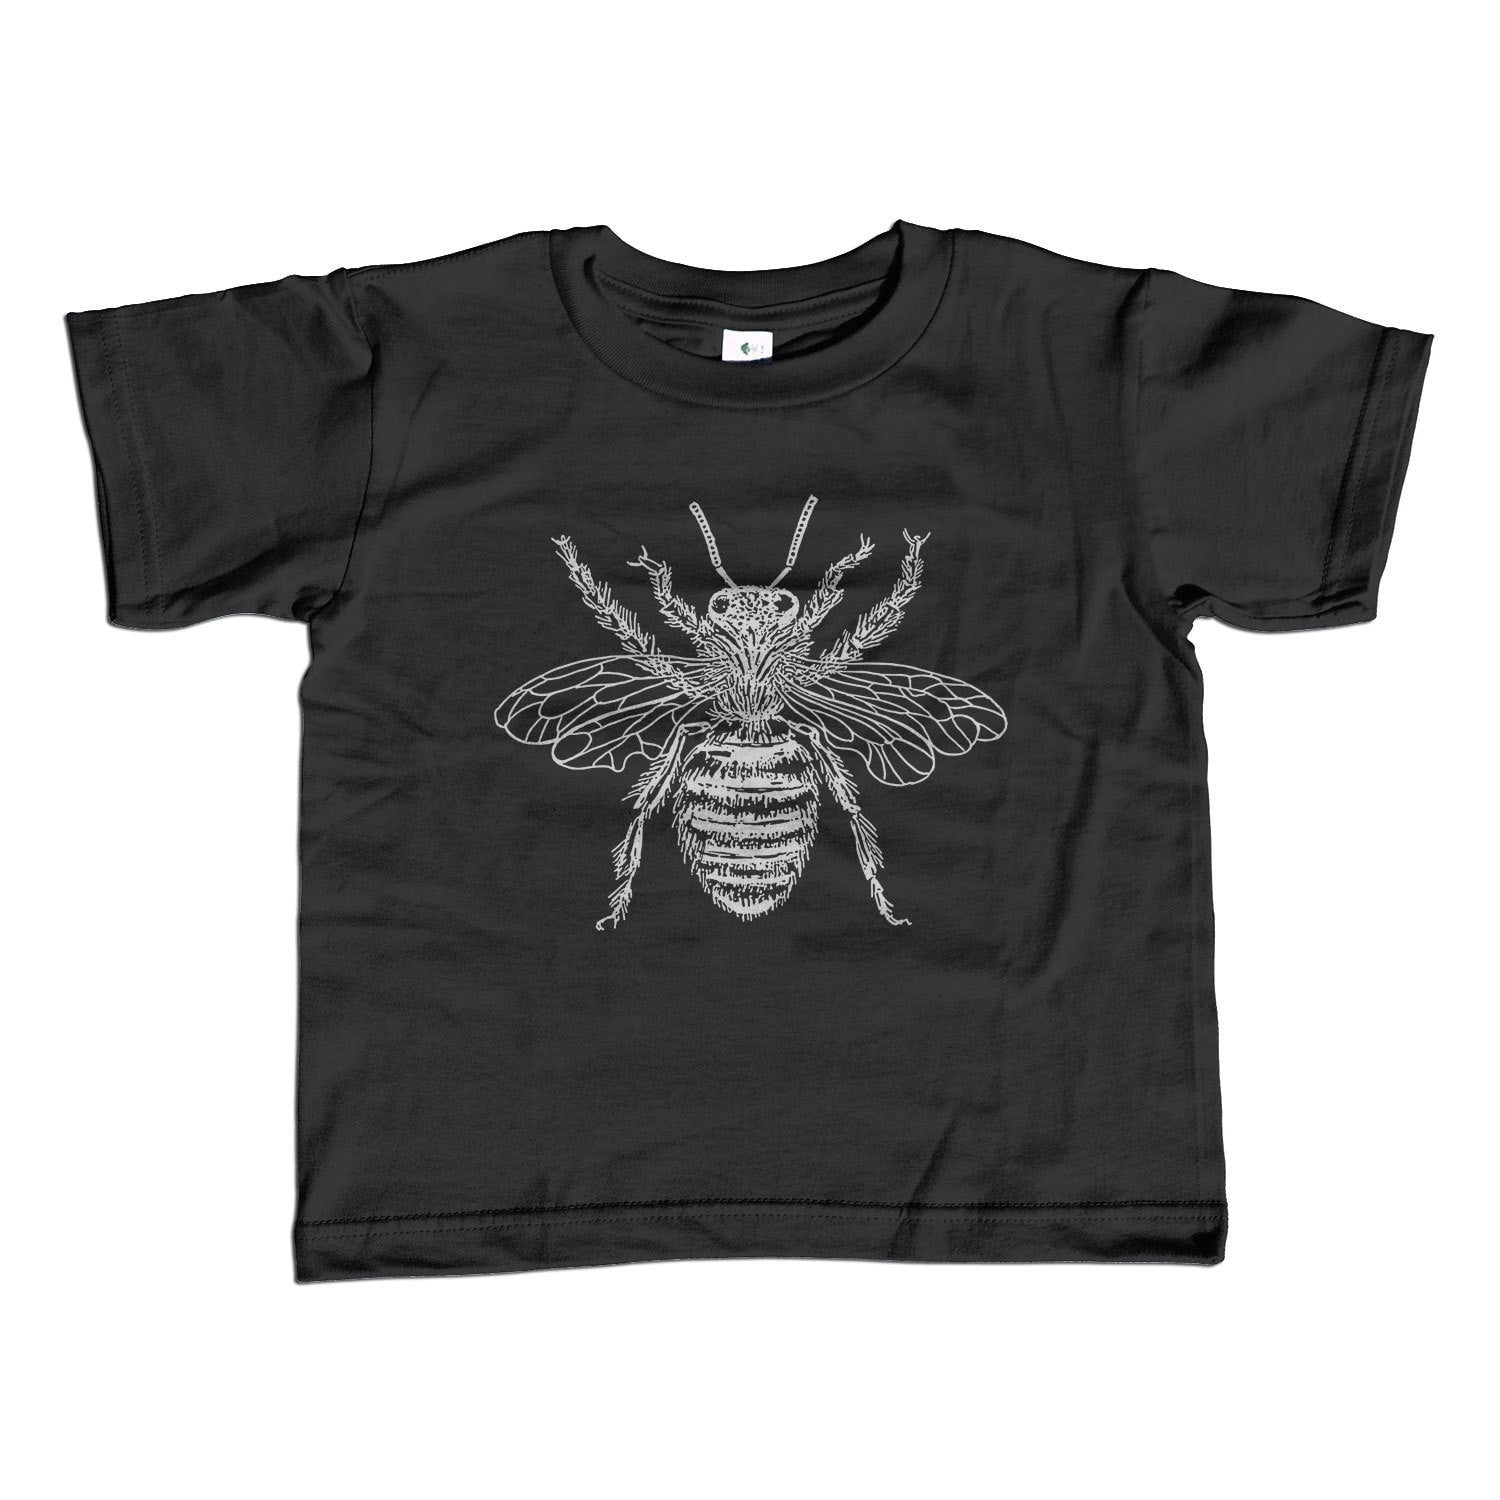 Girl's Bee Insect T-Shirt - Unisex Fit Hipster Bug Tshirt